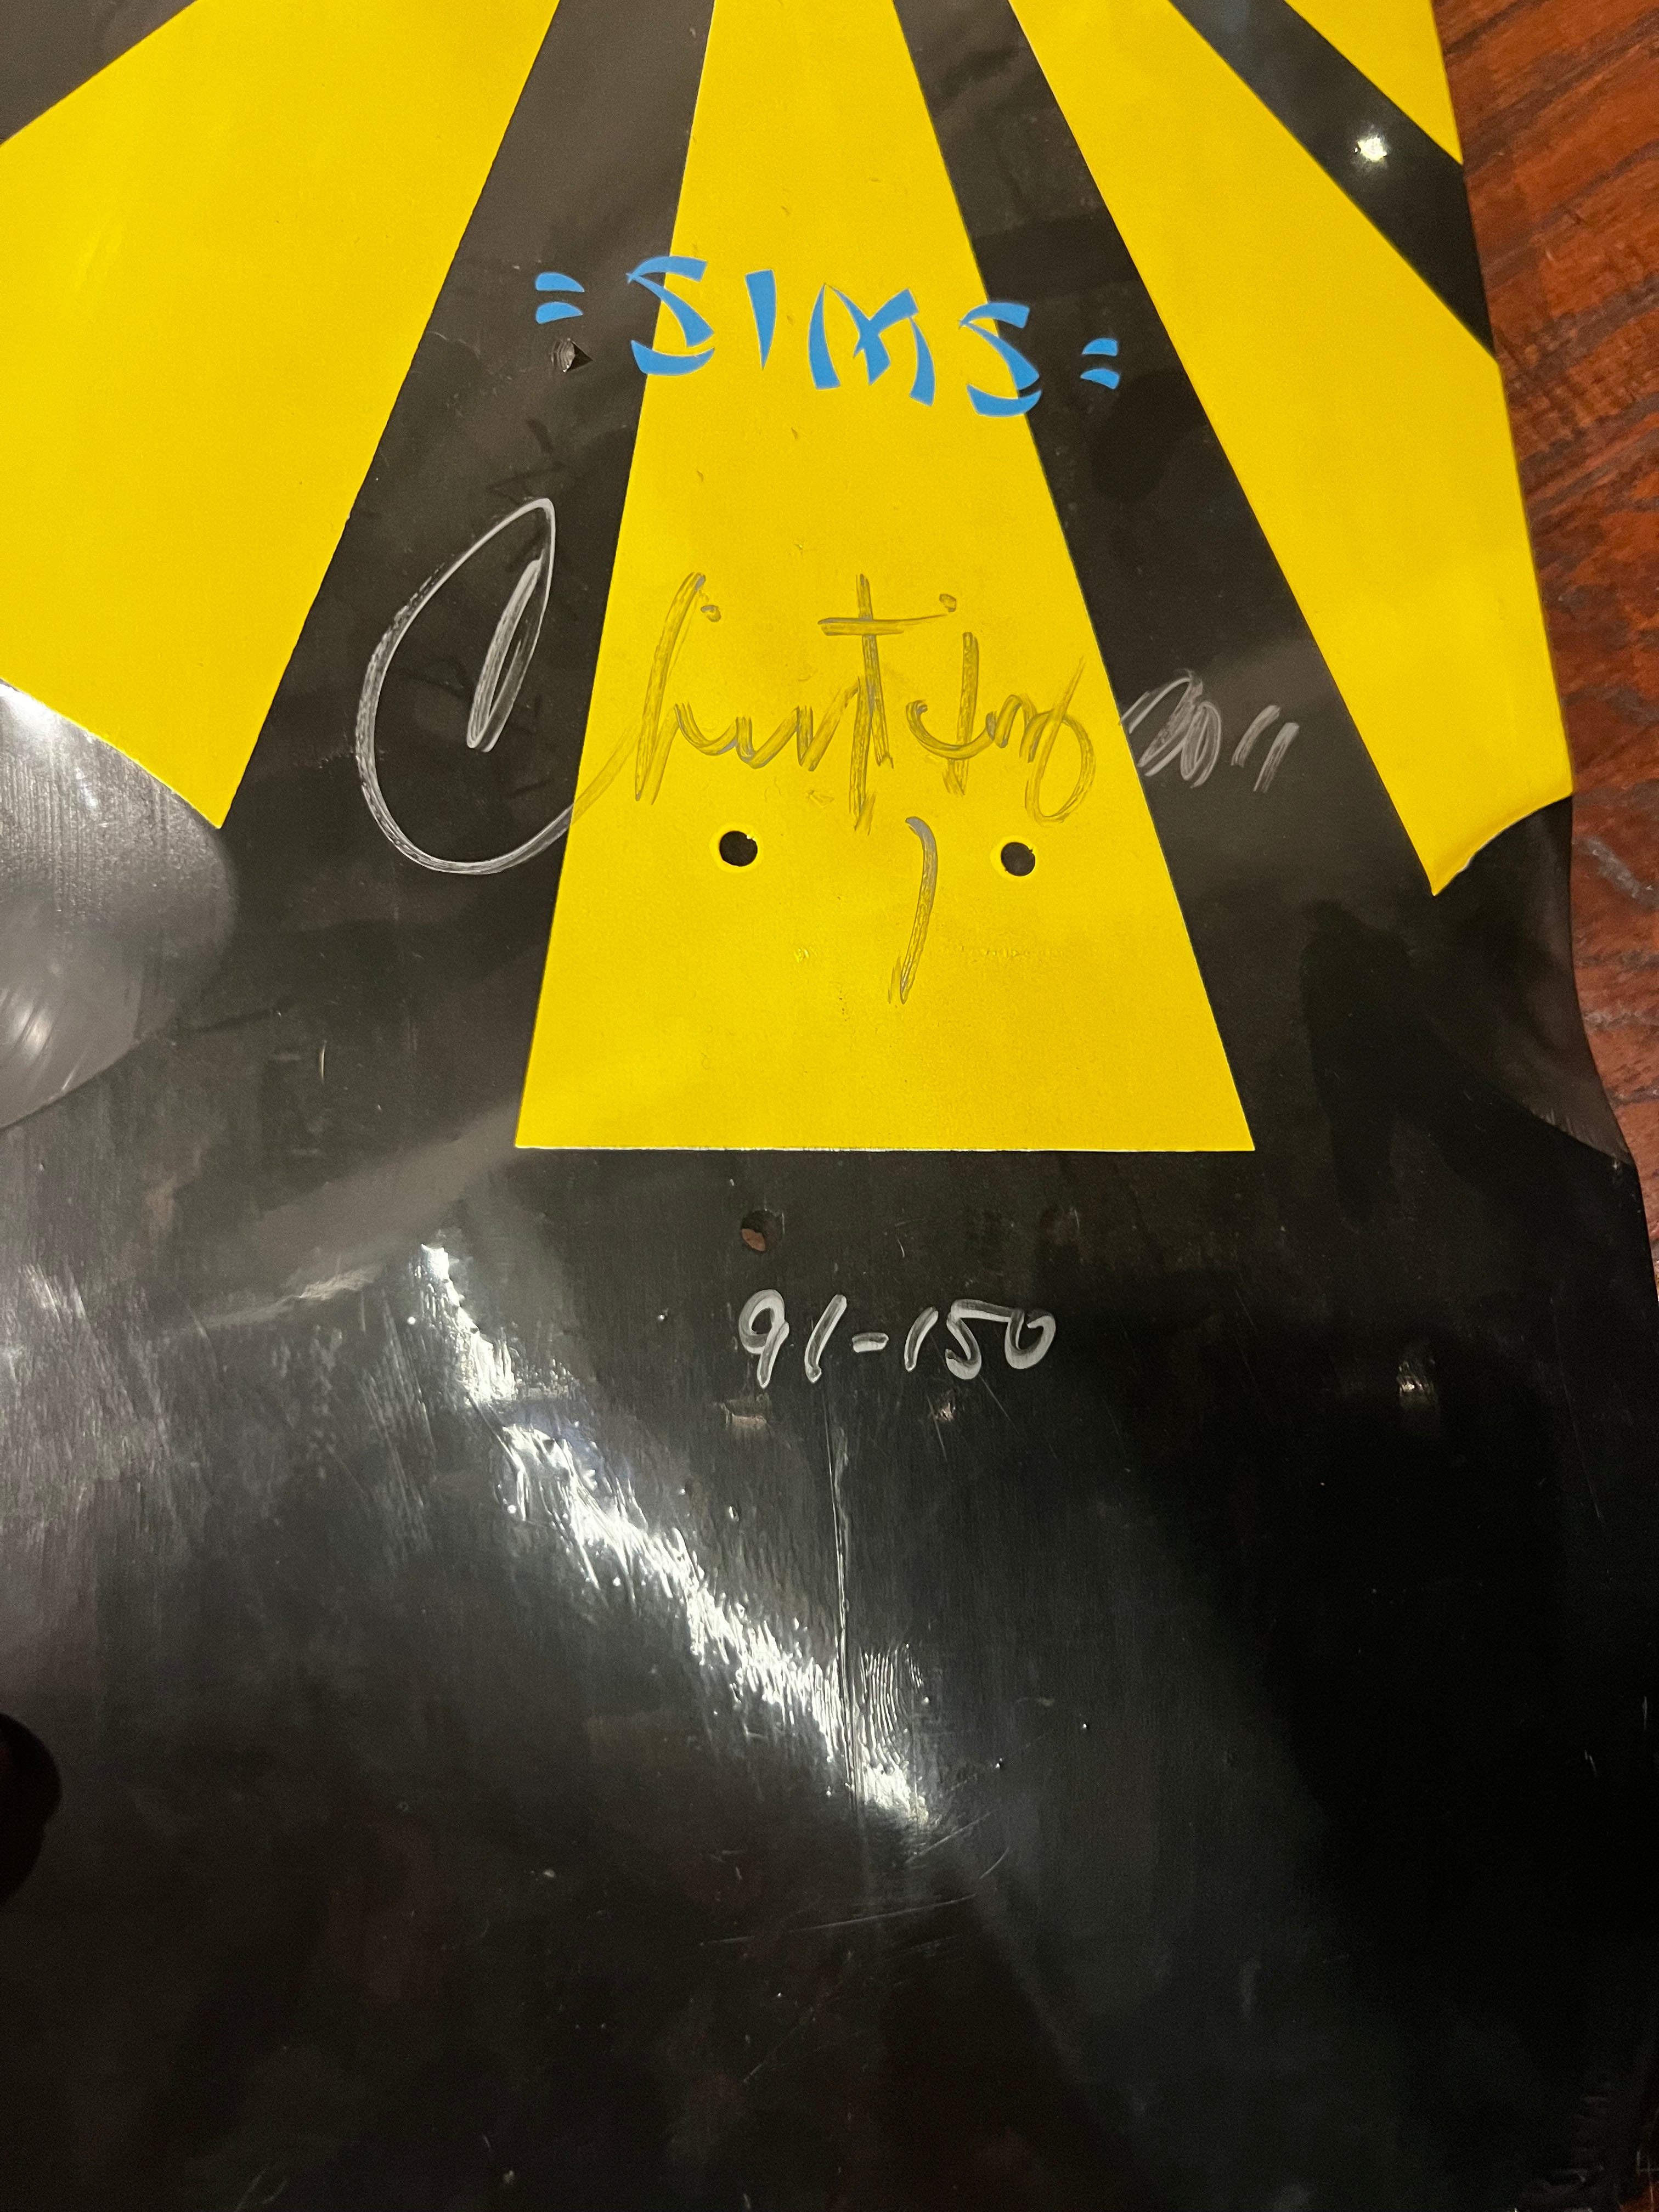 Sims Hosoi Rising Sun Signed Numbered Collector Yellow Skateboard Deck